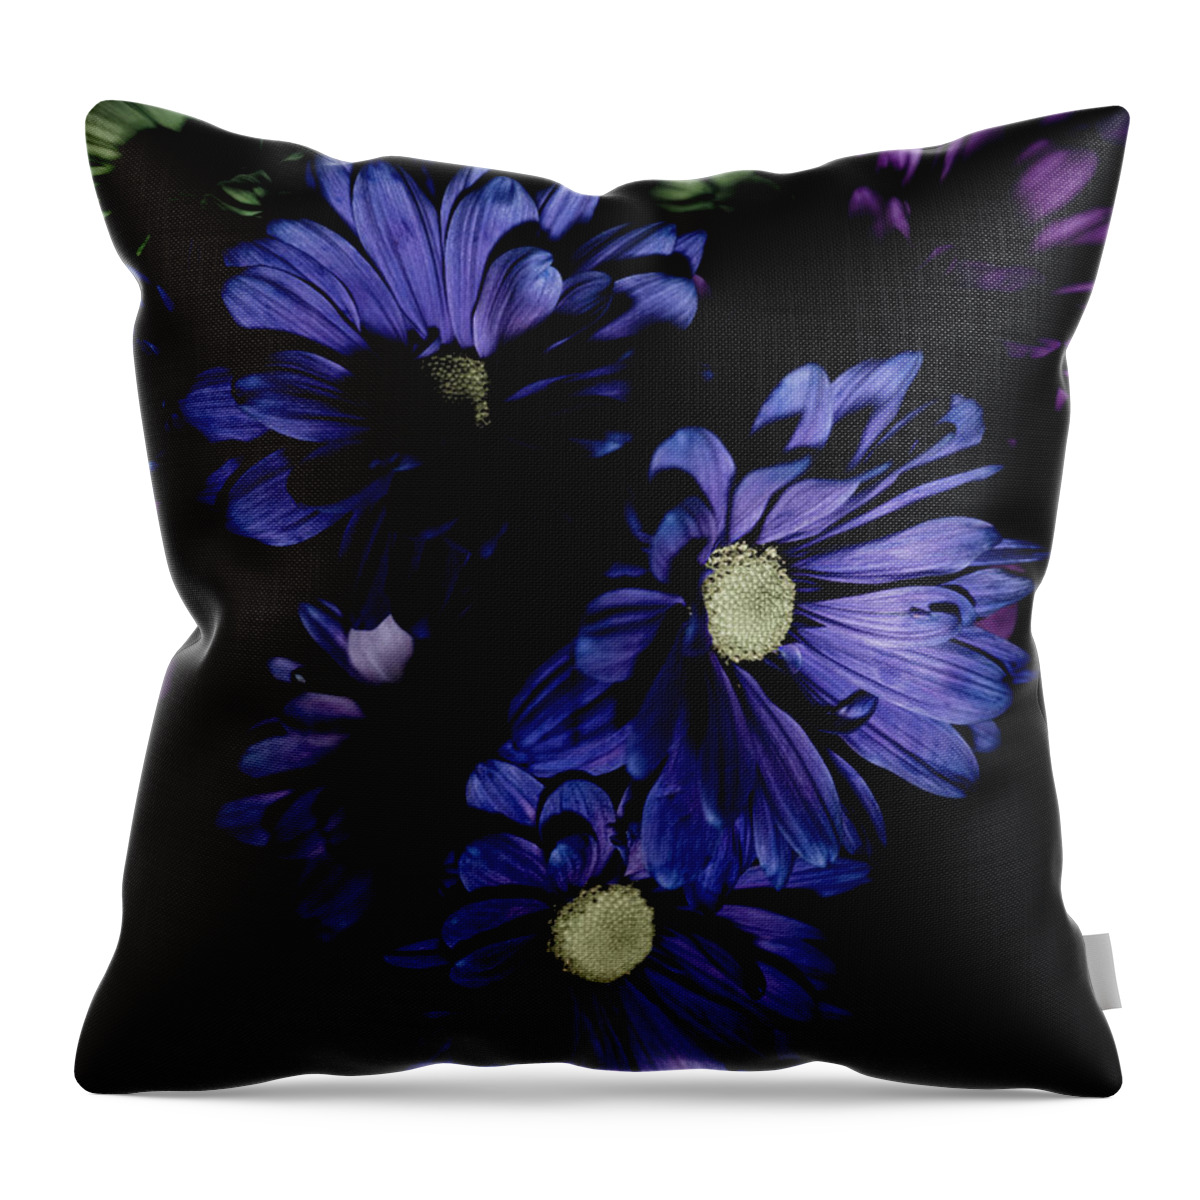 Blue Flowers Throw Pillow featuring the photograph Blue Chrysanthemum by Darcy Dietrich